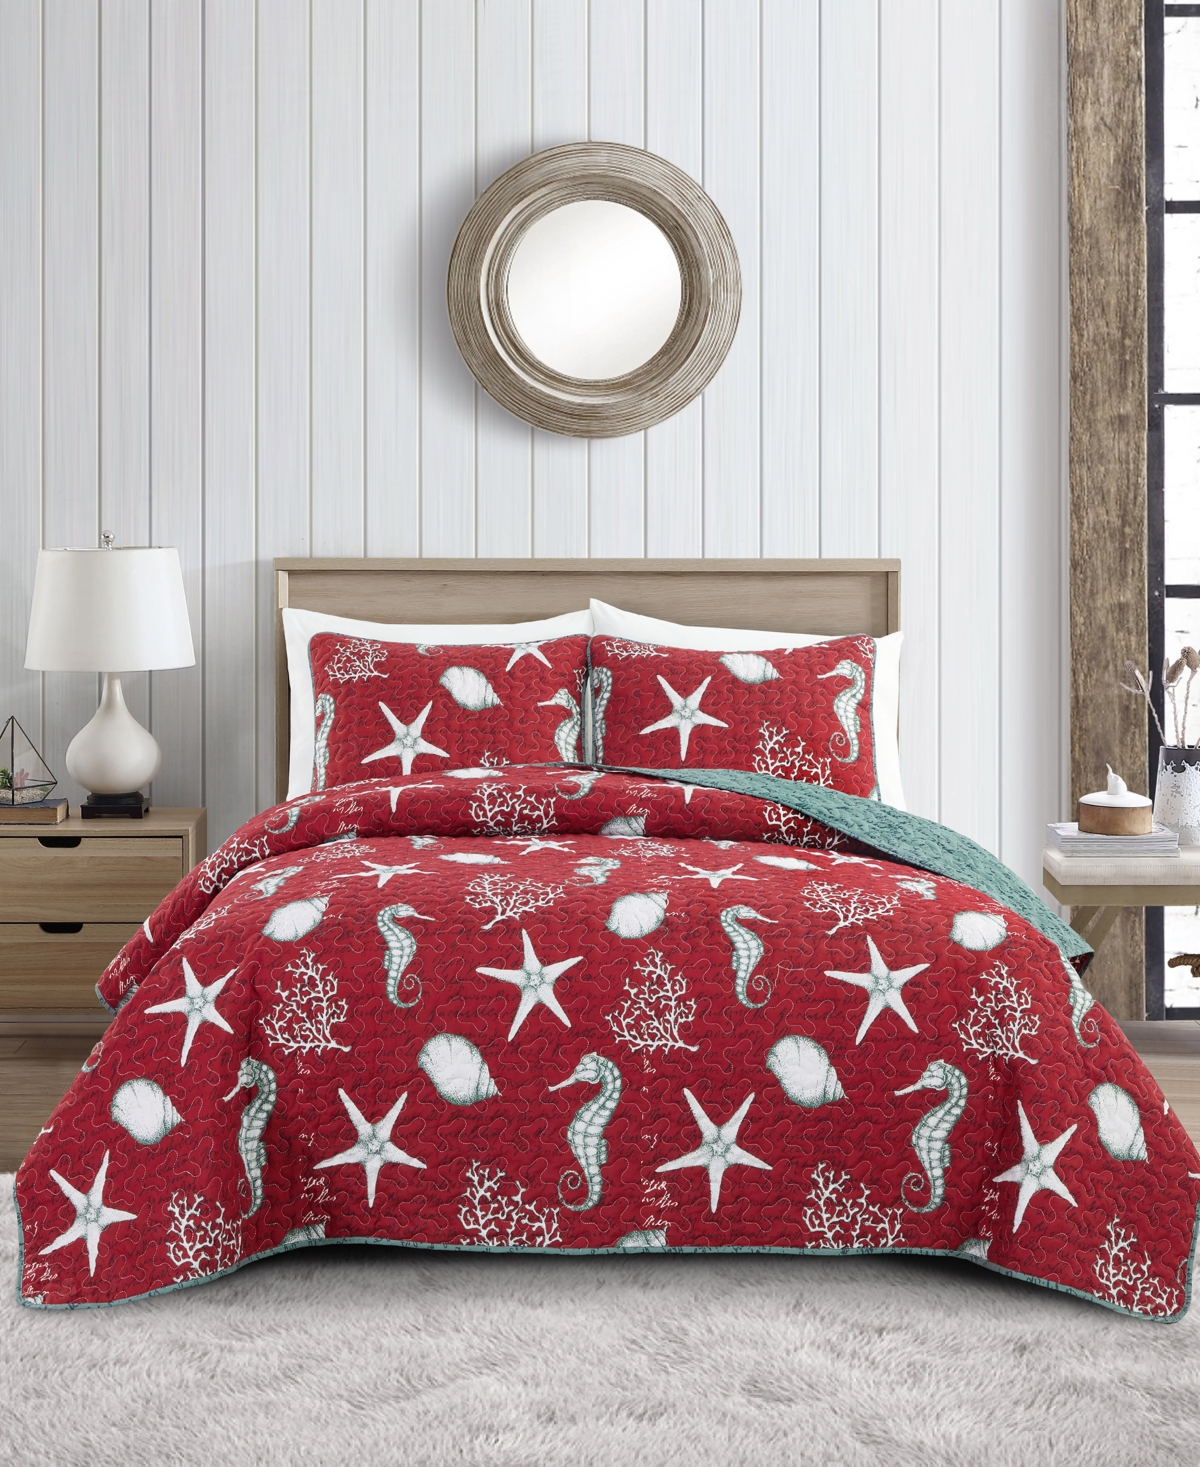 Videri Home Festive Seahorse Reversible 3-piece Quilt Set, King In Red Multi